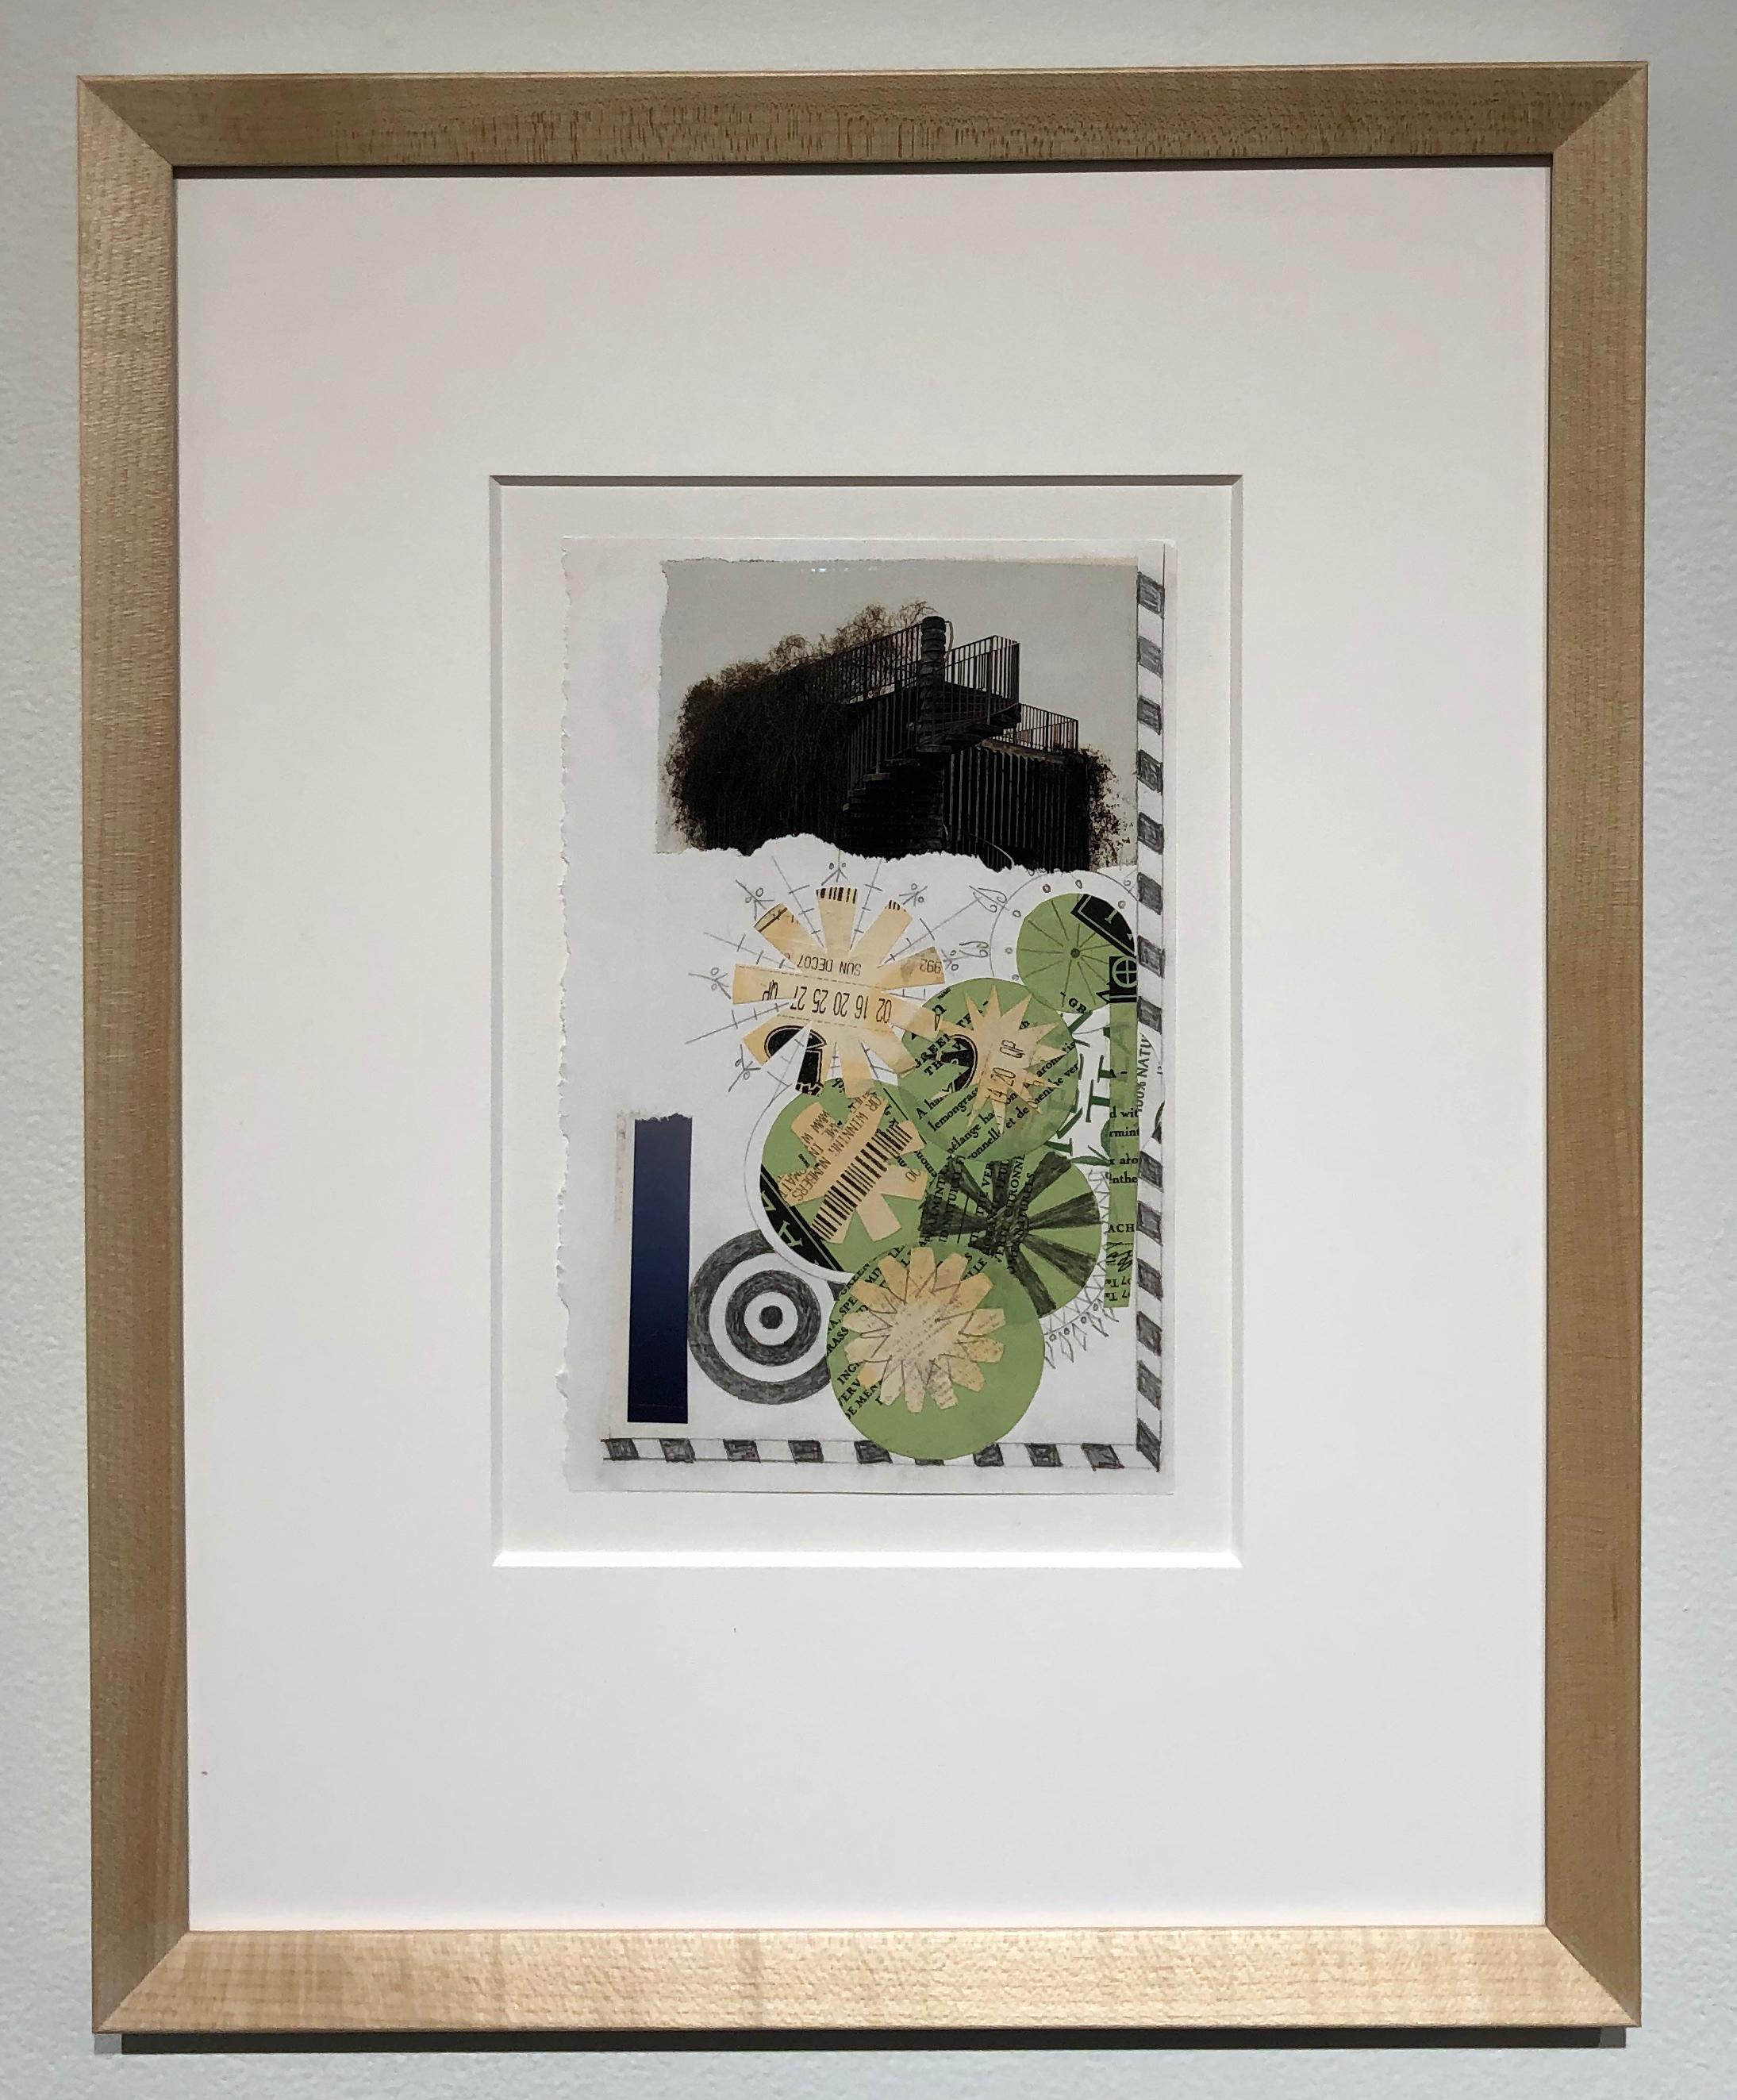 Collage No. 49, Graphic Collage, Vintage Ephemera, Matted, Framed - Contemporary Mixed Media Art by Jim Rose